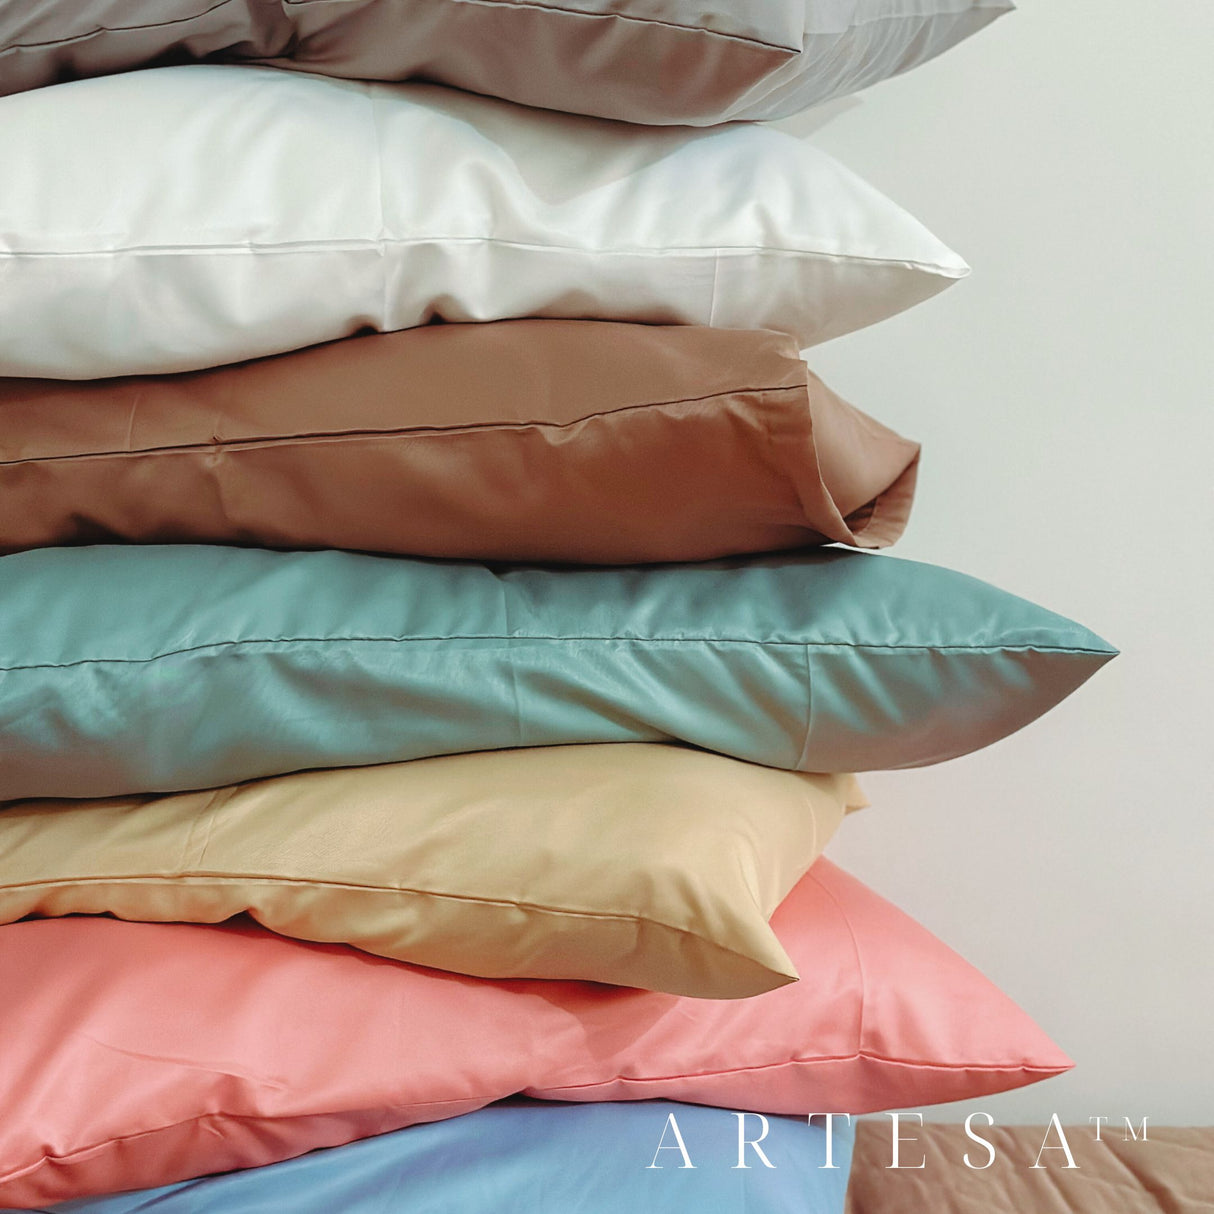 Artesa Luxe 100% Prime Canadian Cotton Pillowcase (Buy 1 Get 1 Deal) - Premium Bedding for Comfort and Style